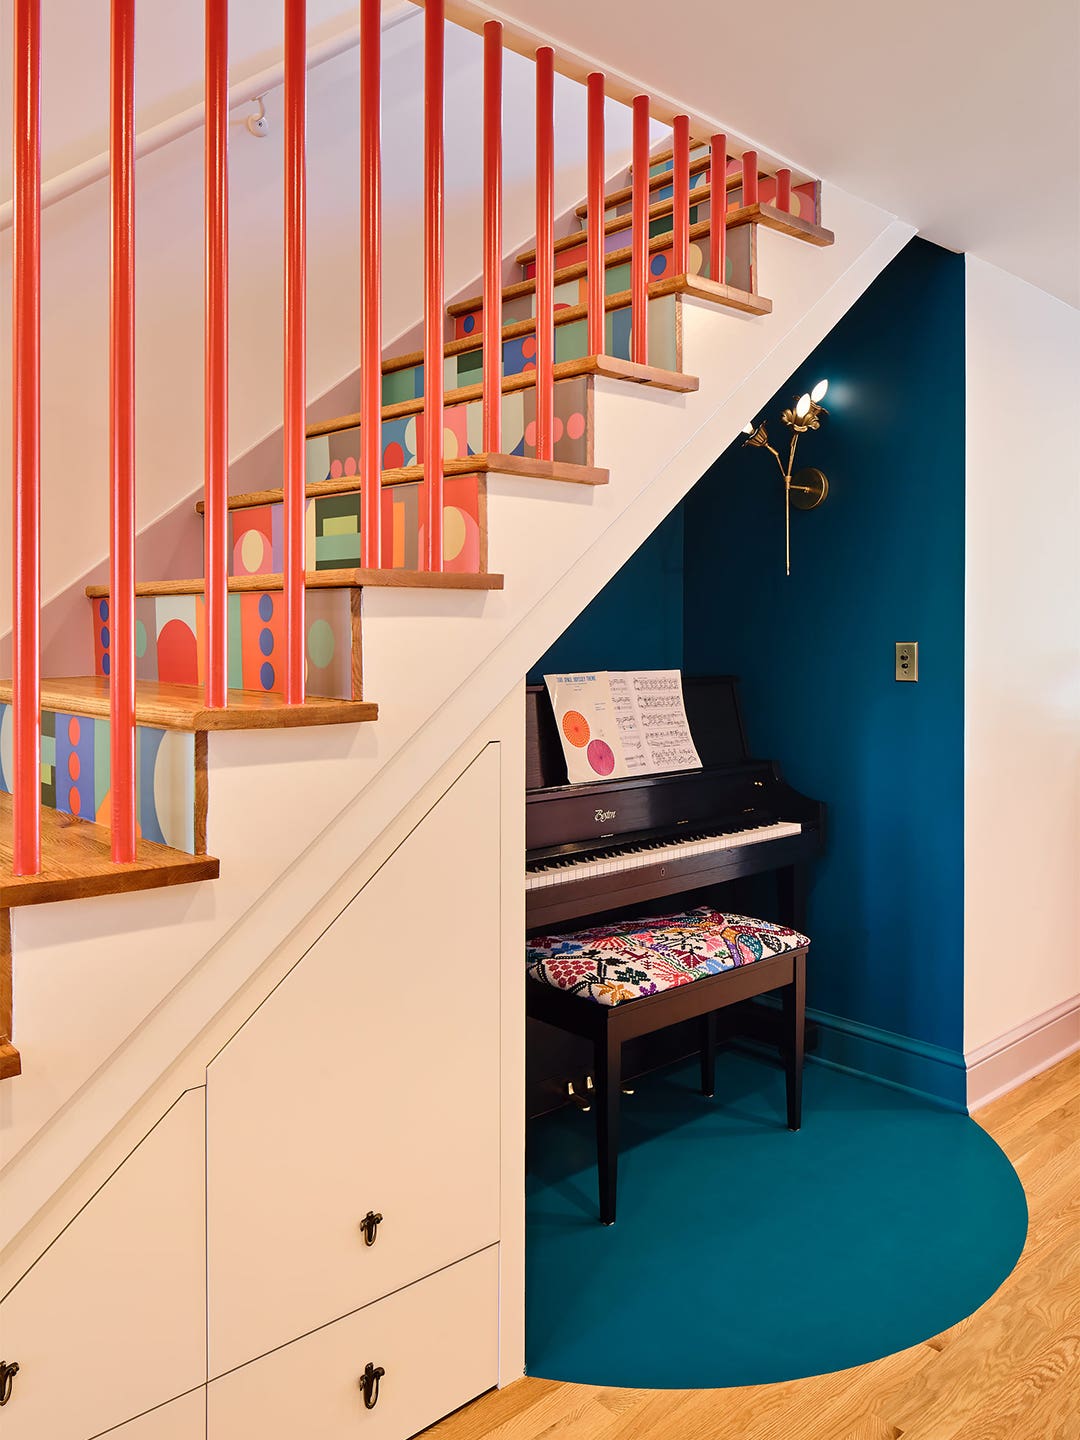 Bauhaus-Inspired Vinyl Made This Colorful Home’s Stairwell the Happiest Place